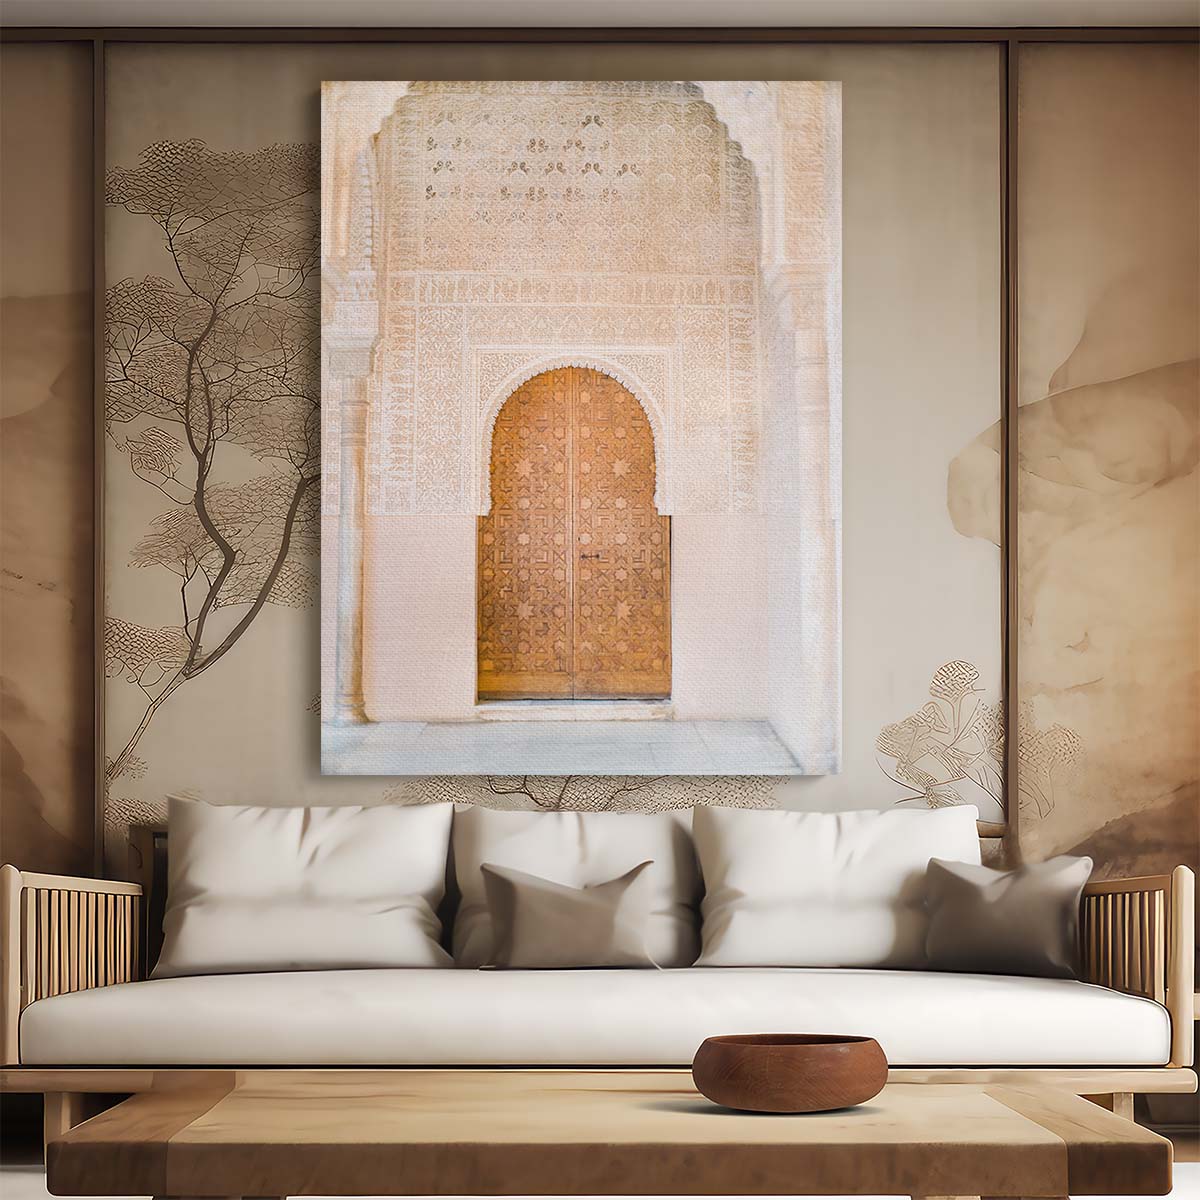 Bright Alhambra Arch Doorway, Granada Spain Photography by Luxuriance Designs, made in USA